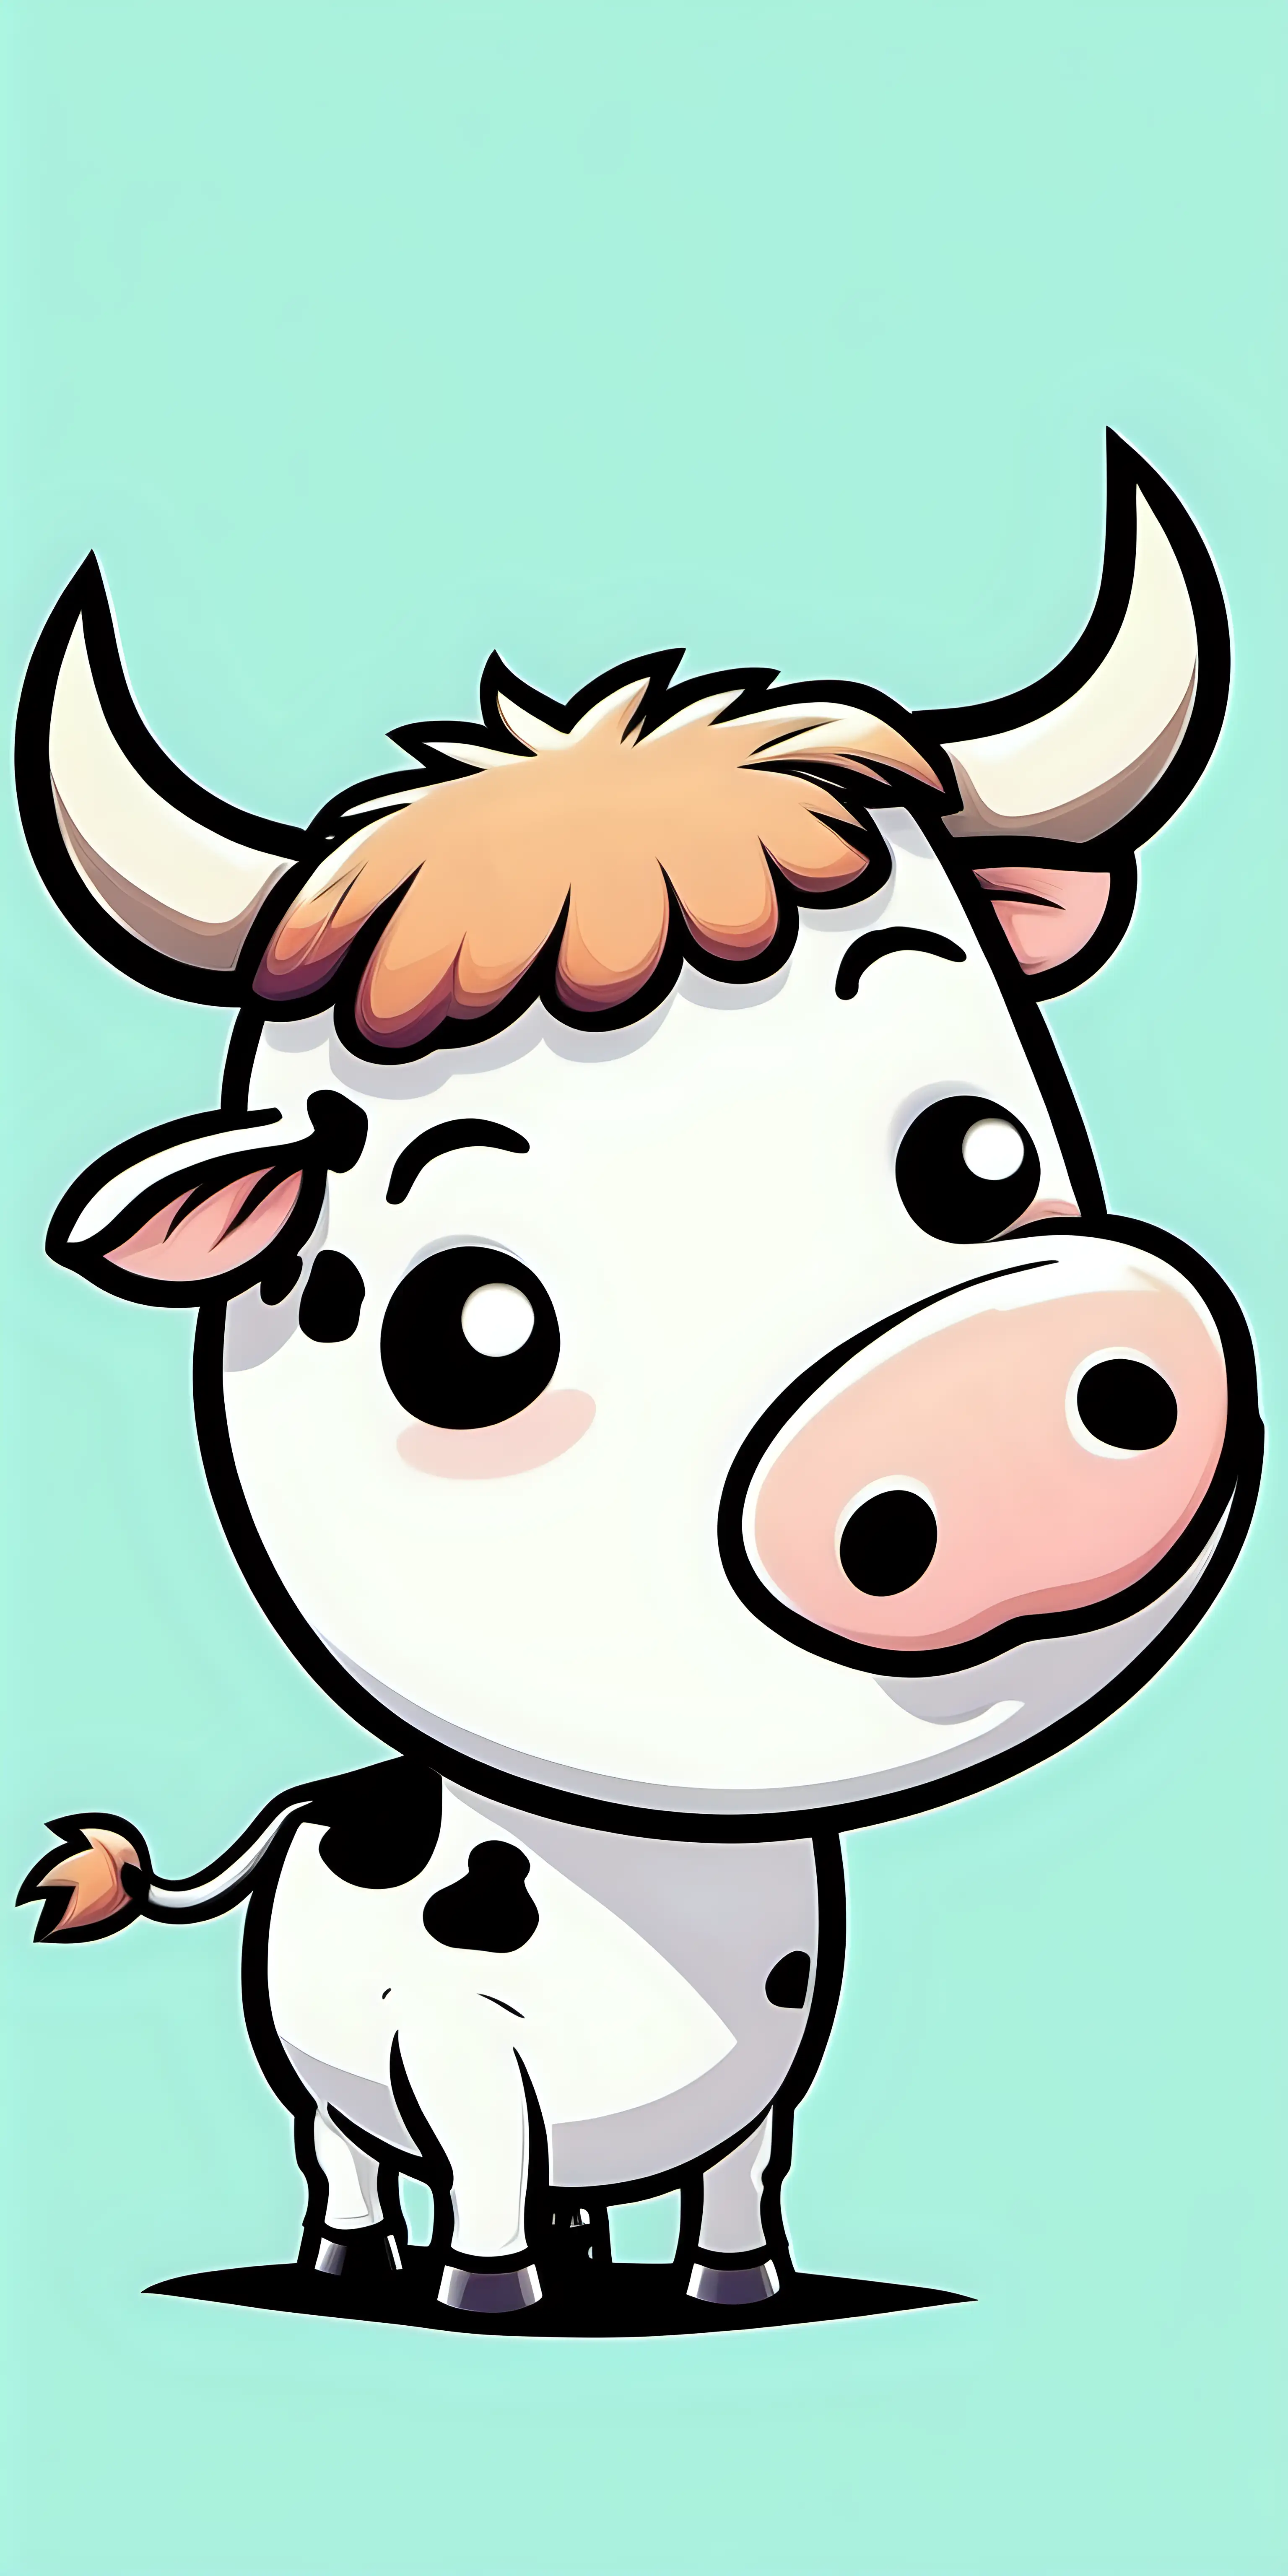 Sarcastic Kawaii Cow in Comic Style on White Background